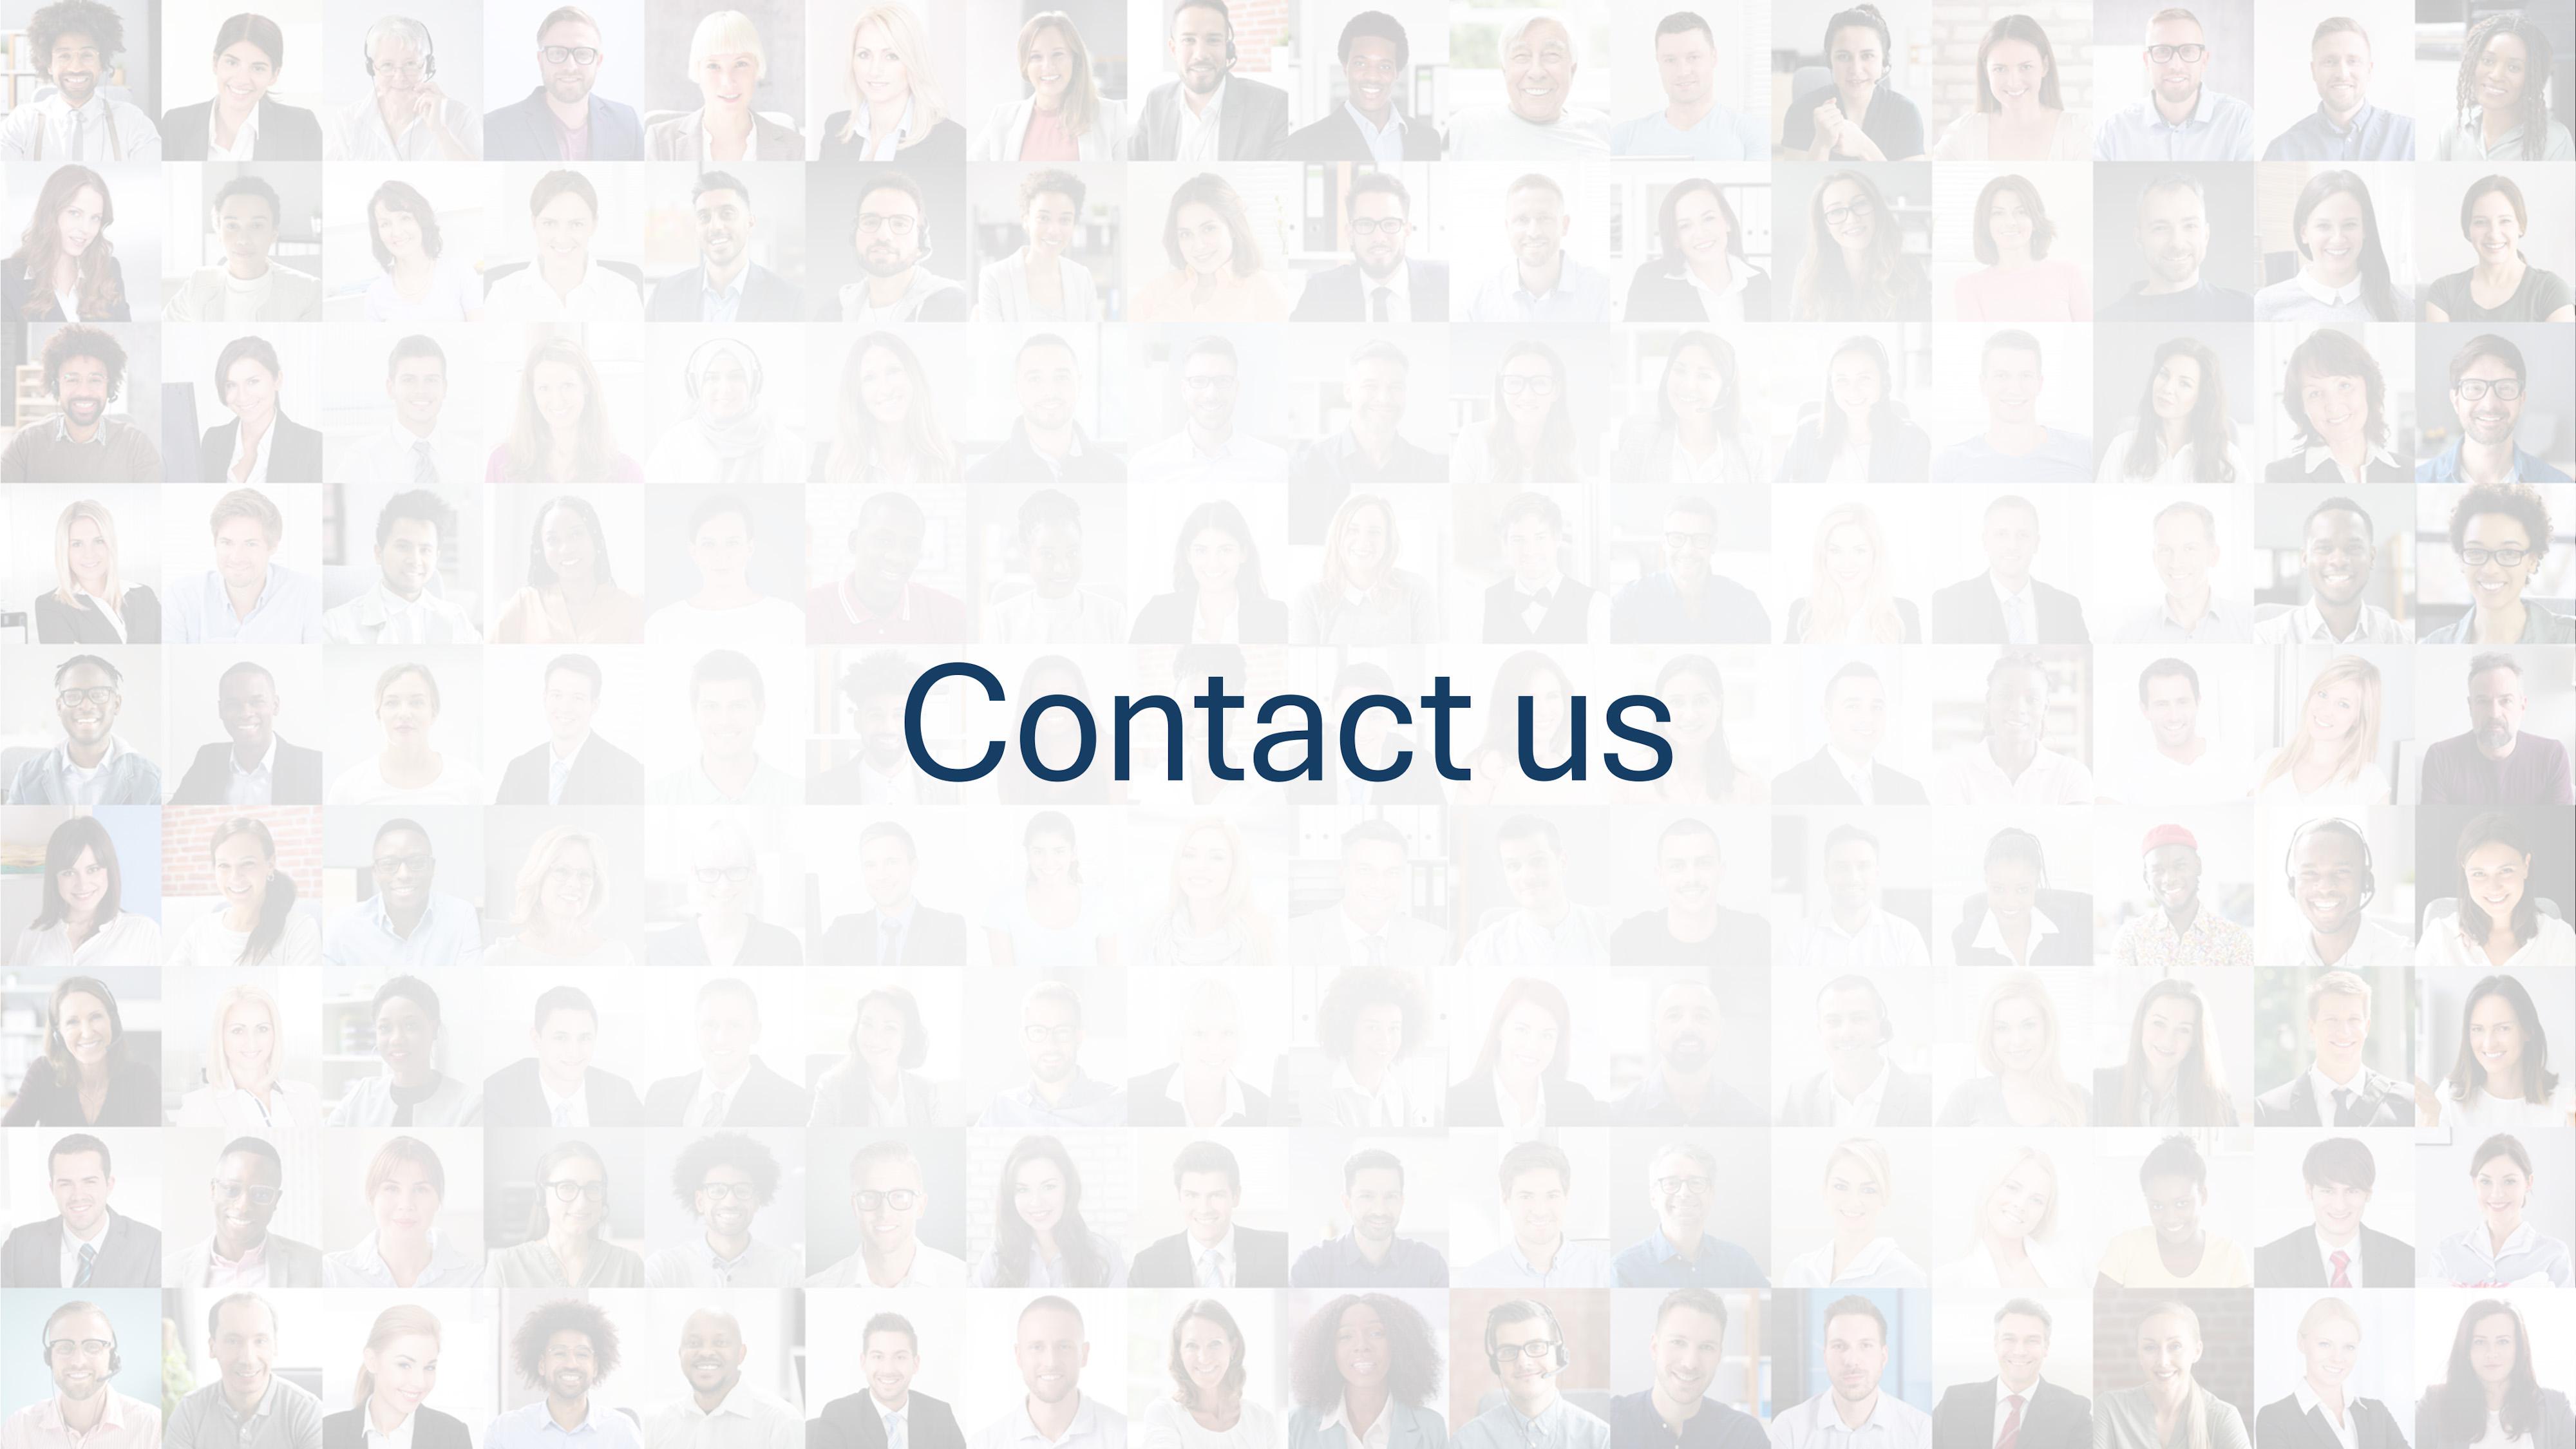 allPeople_Contact us_header-footer_edited